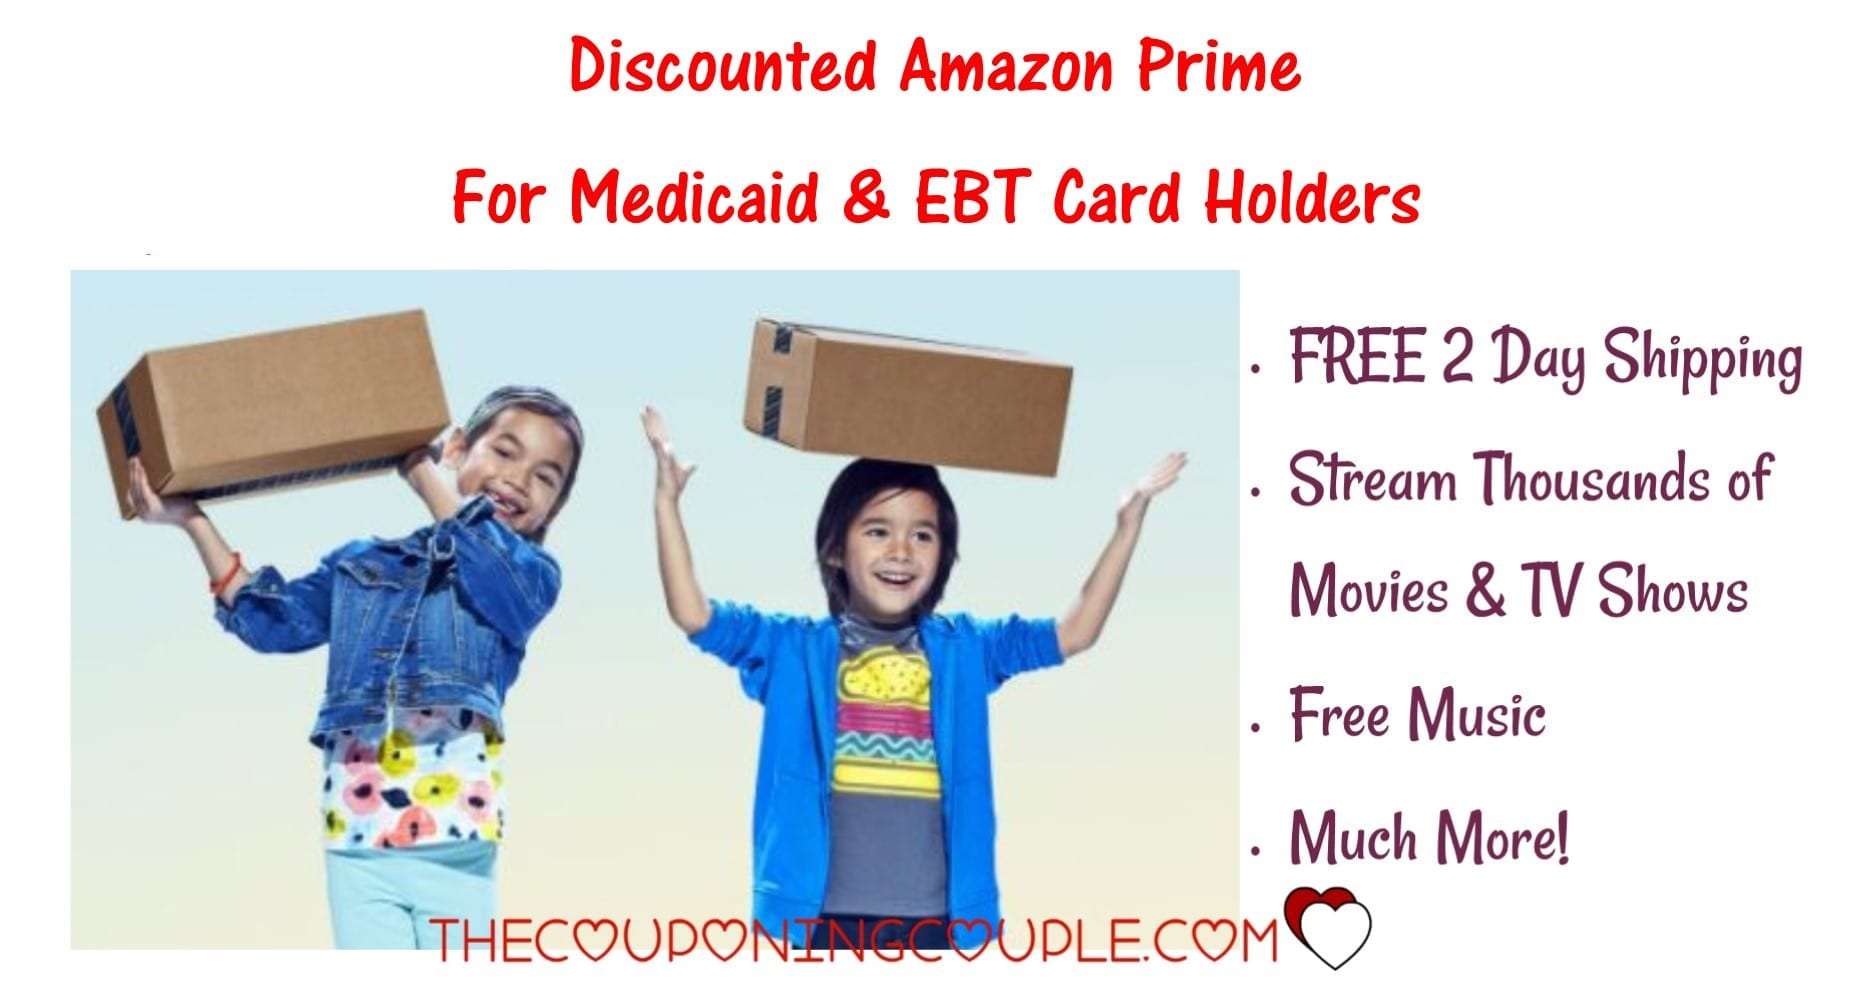 Amazon Prime for EBT Card Holders and Medicaid, $5.99/Month